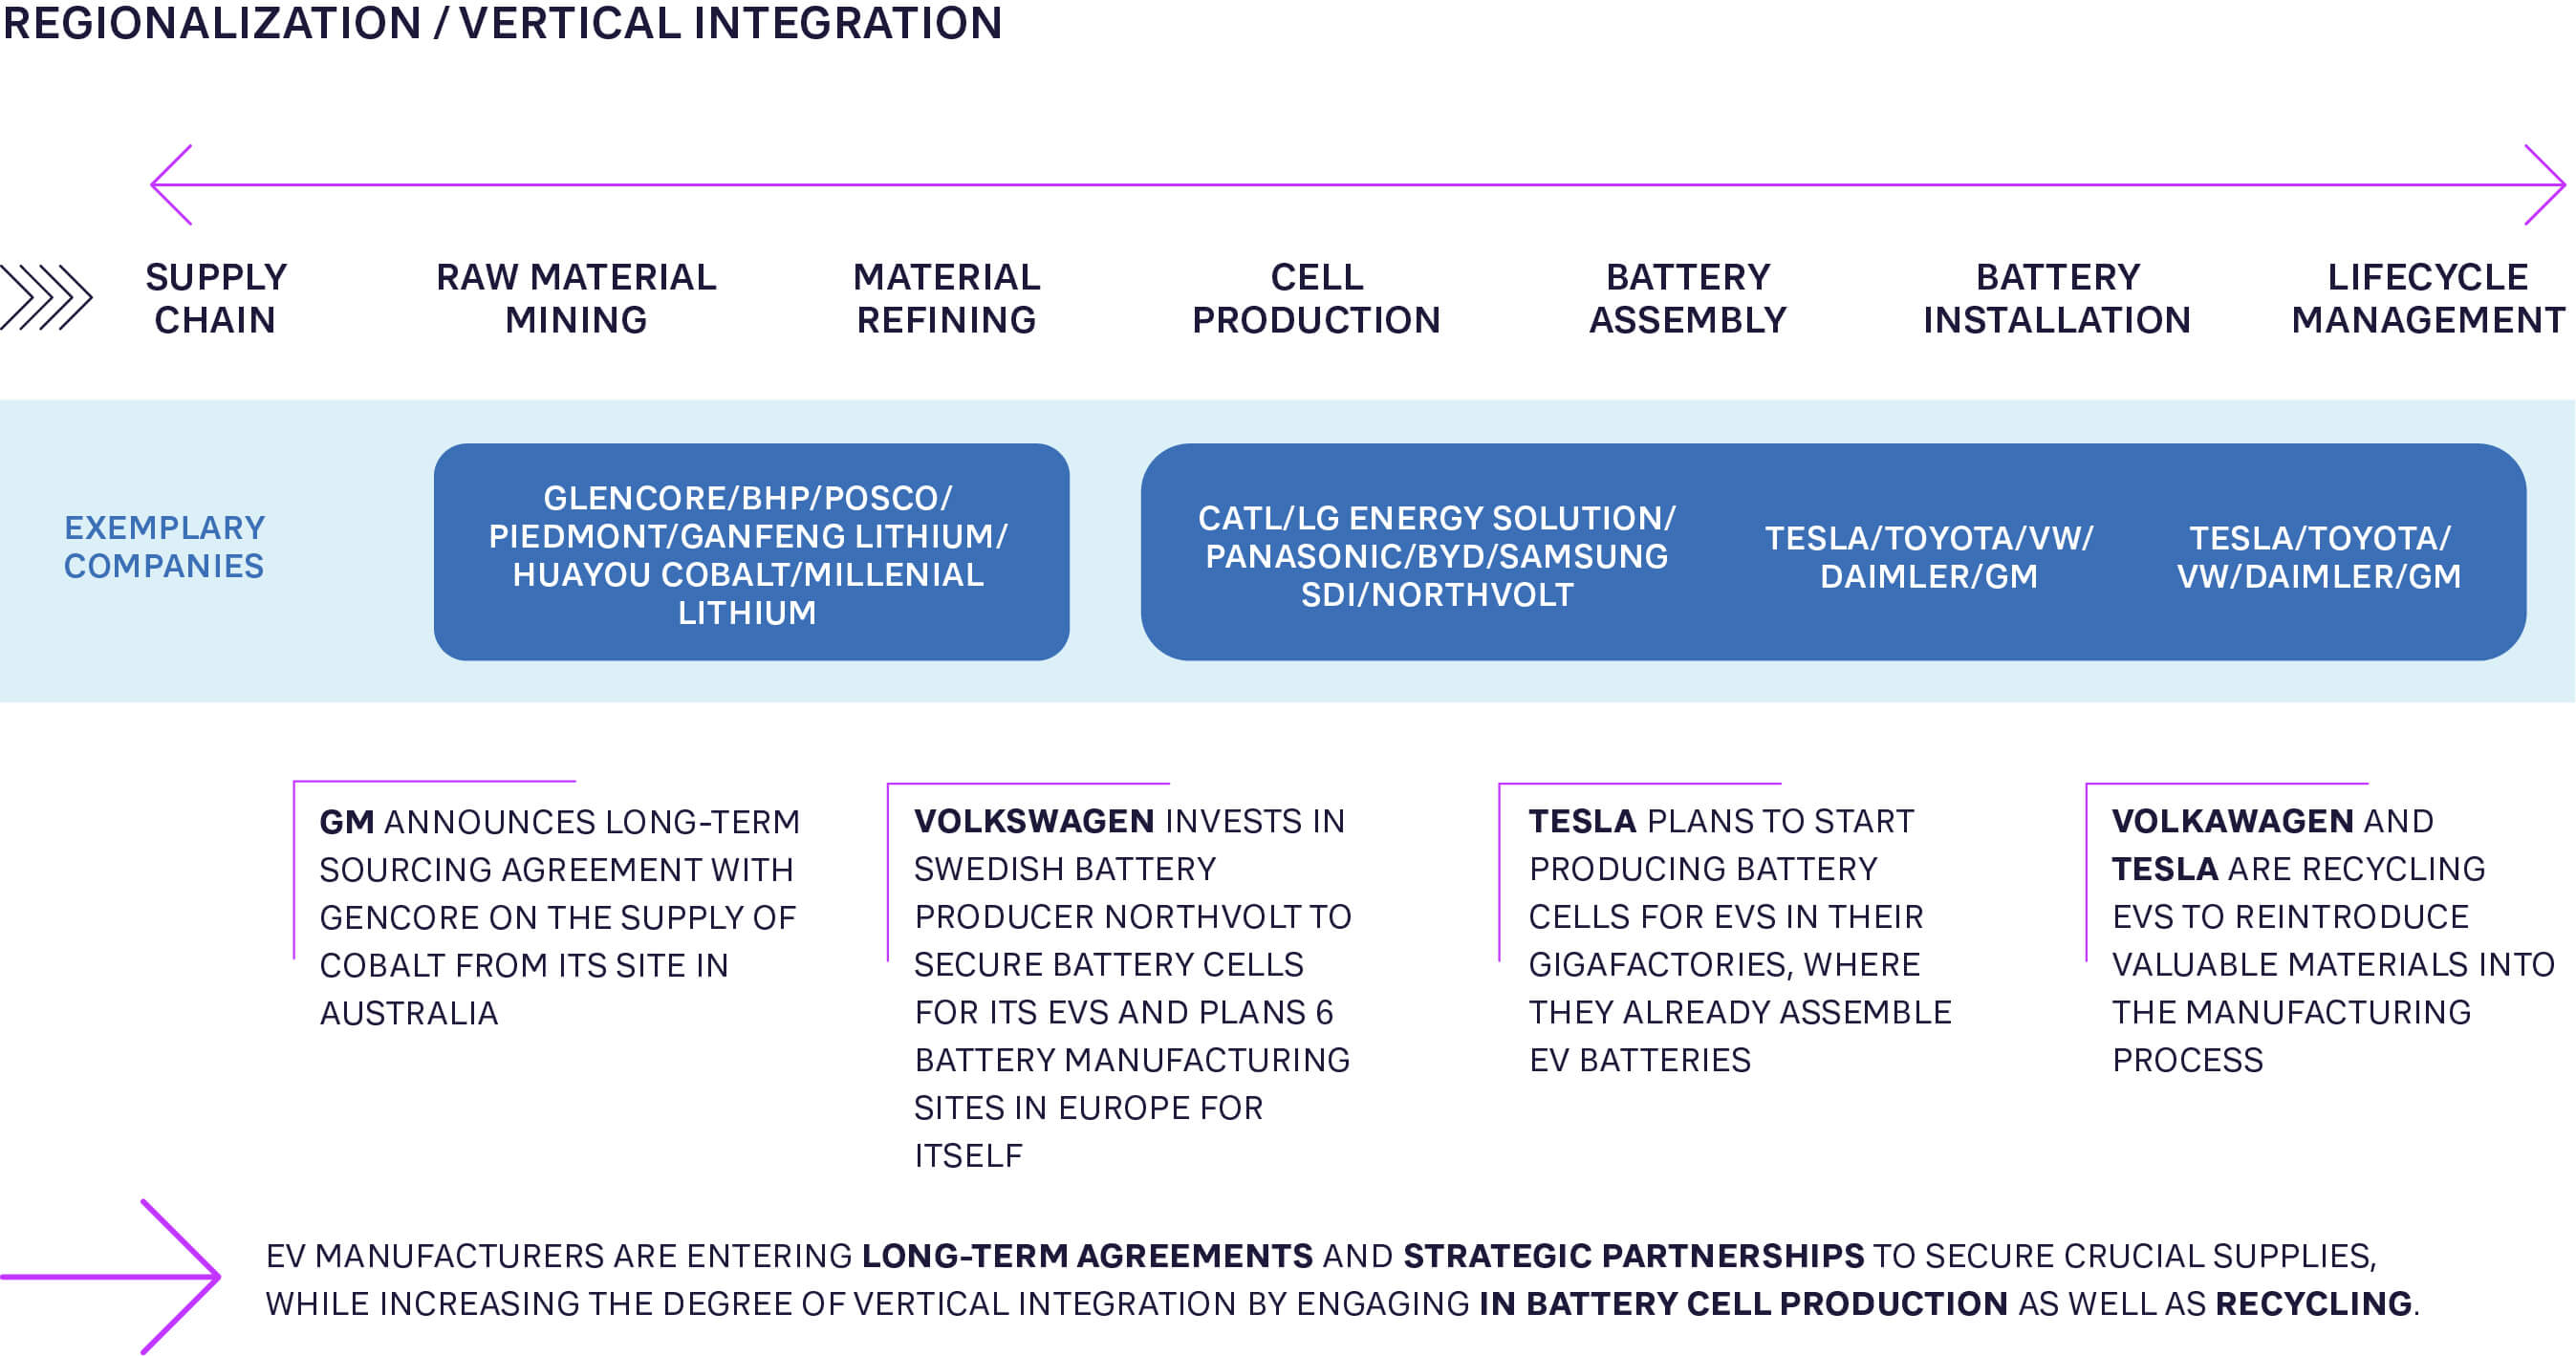 FIGURE 3: PARTNERSHIPS AND VERTICAL INTEGRATION ACROSS THE BATTERY SUPPLY CHAIN